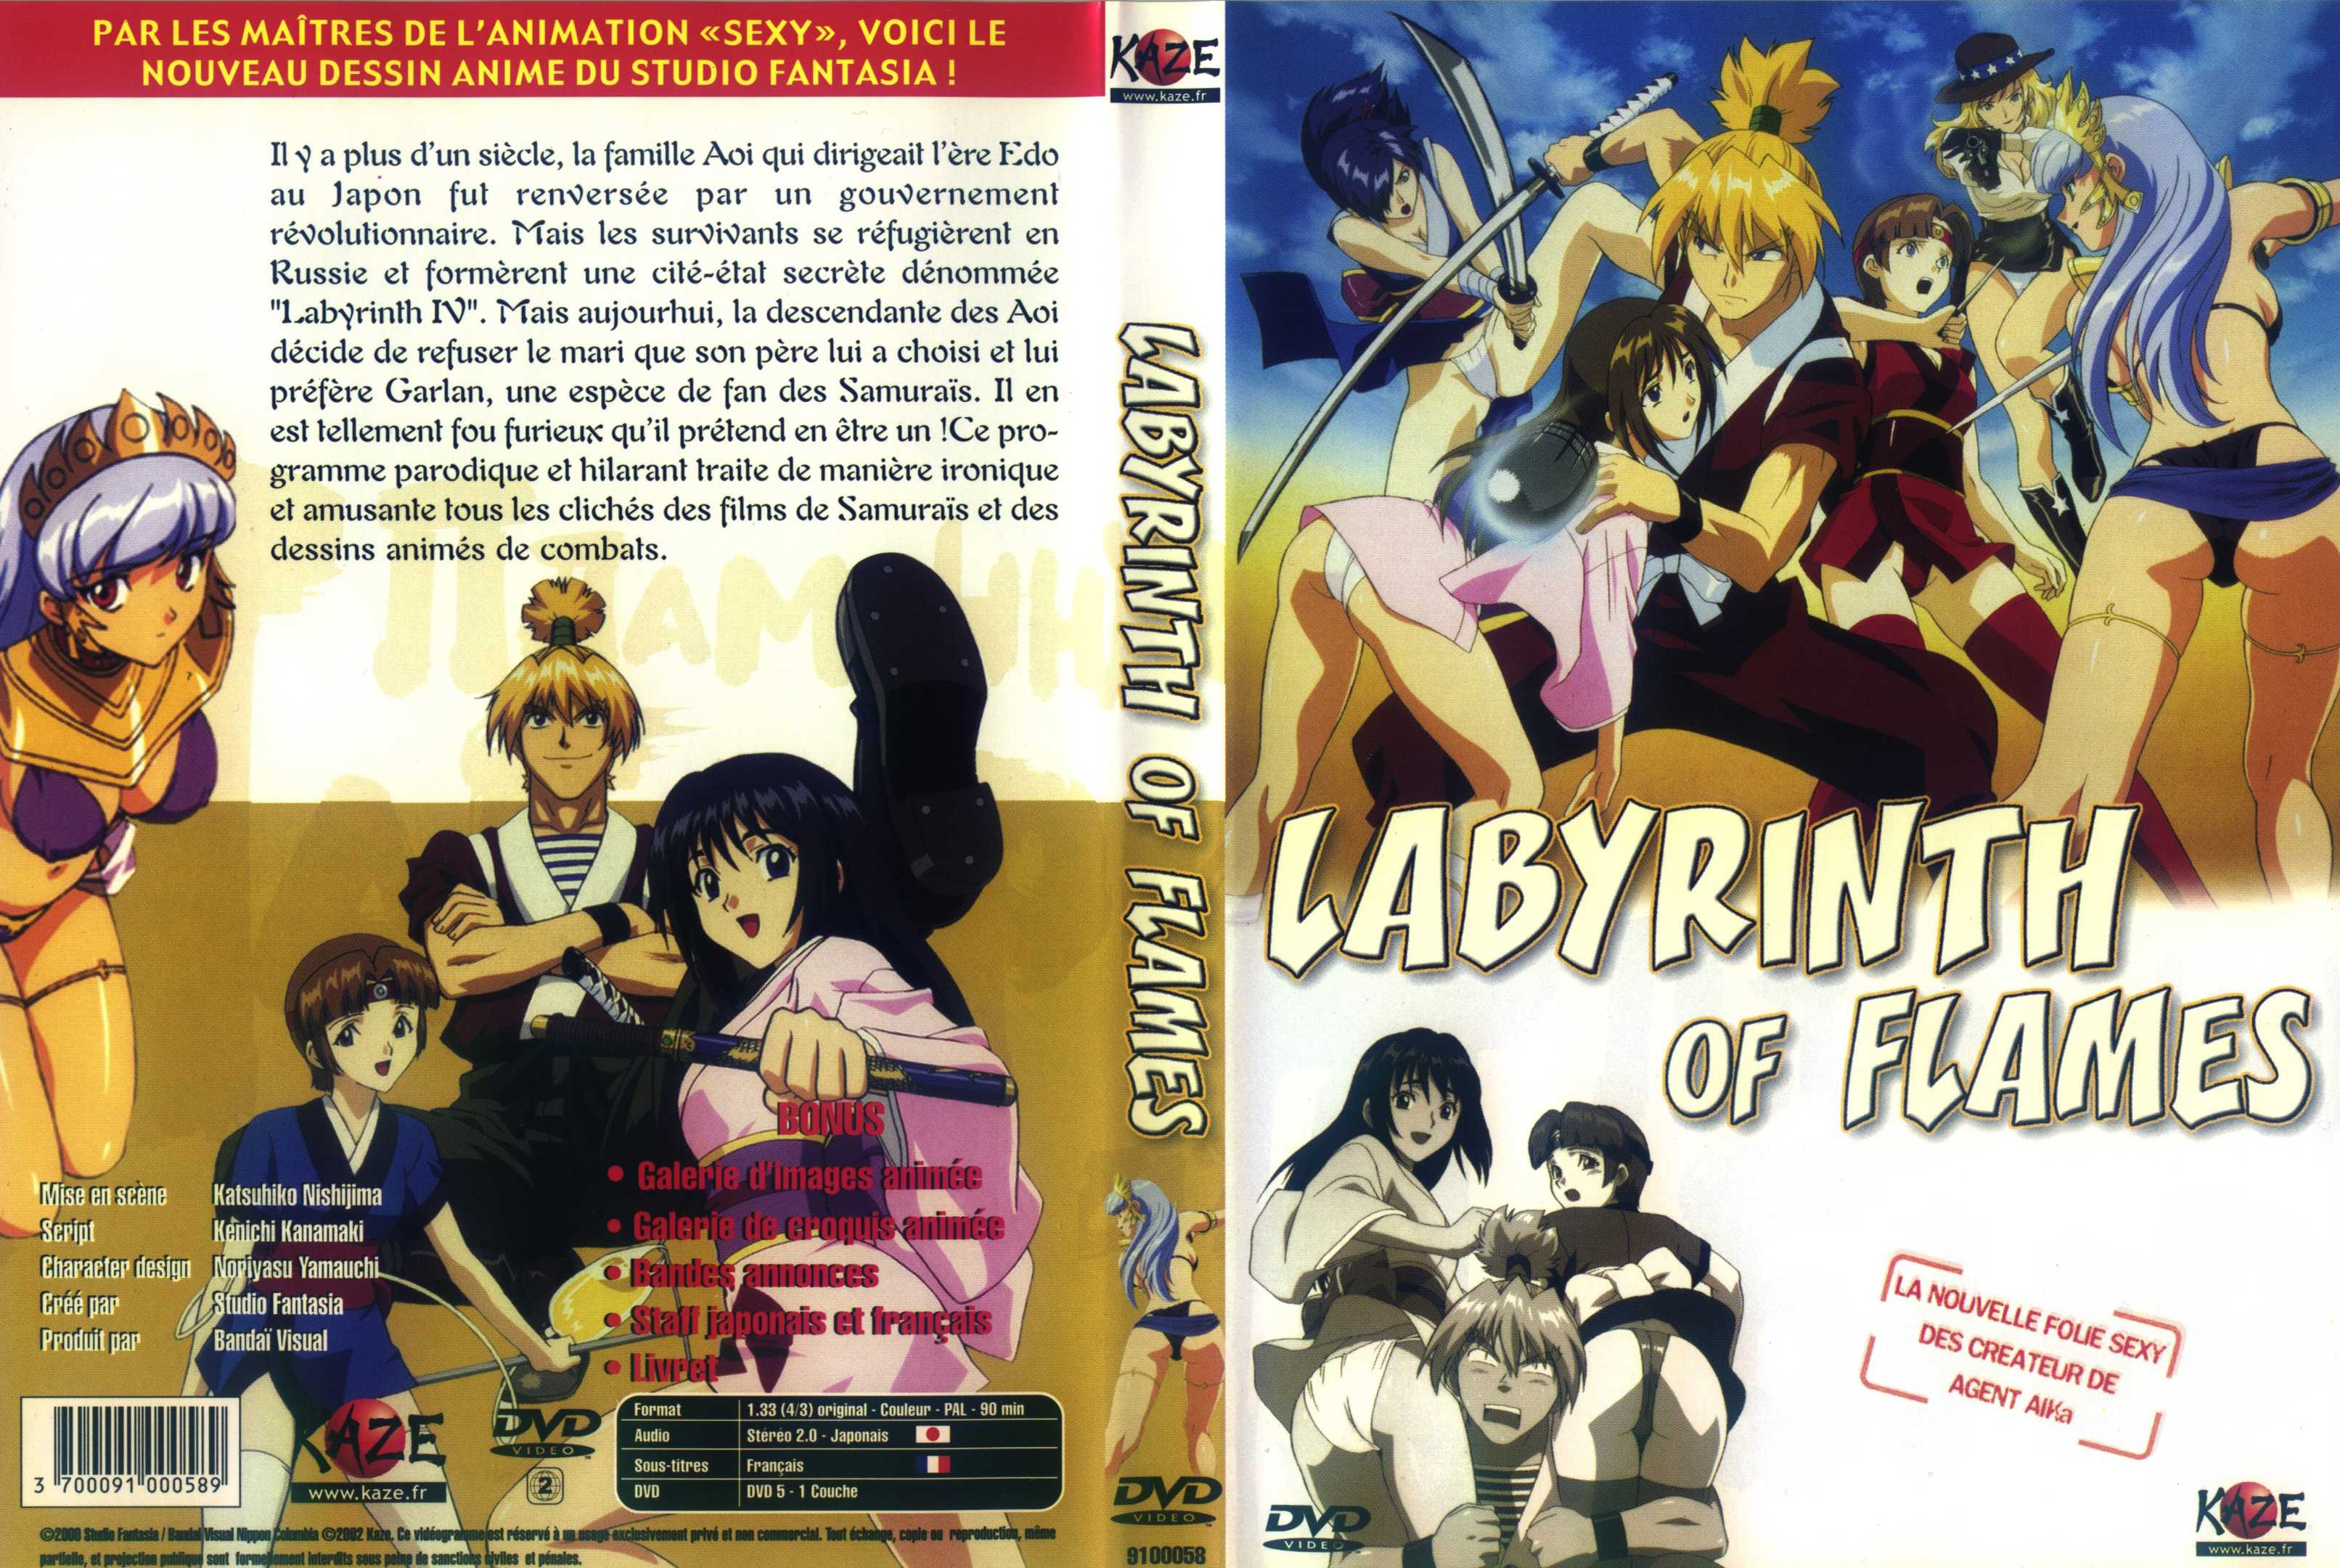 Jaquette DVD Labyrinth of flames